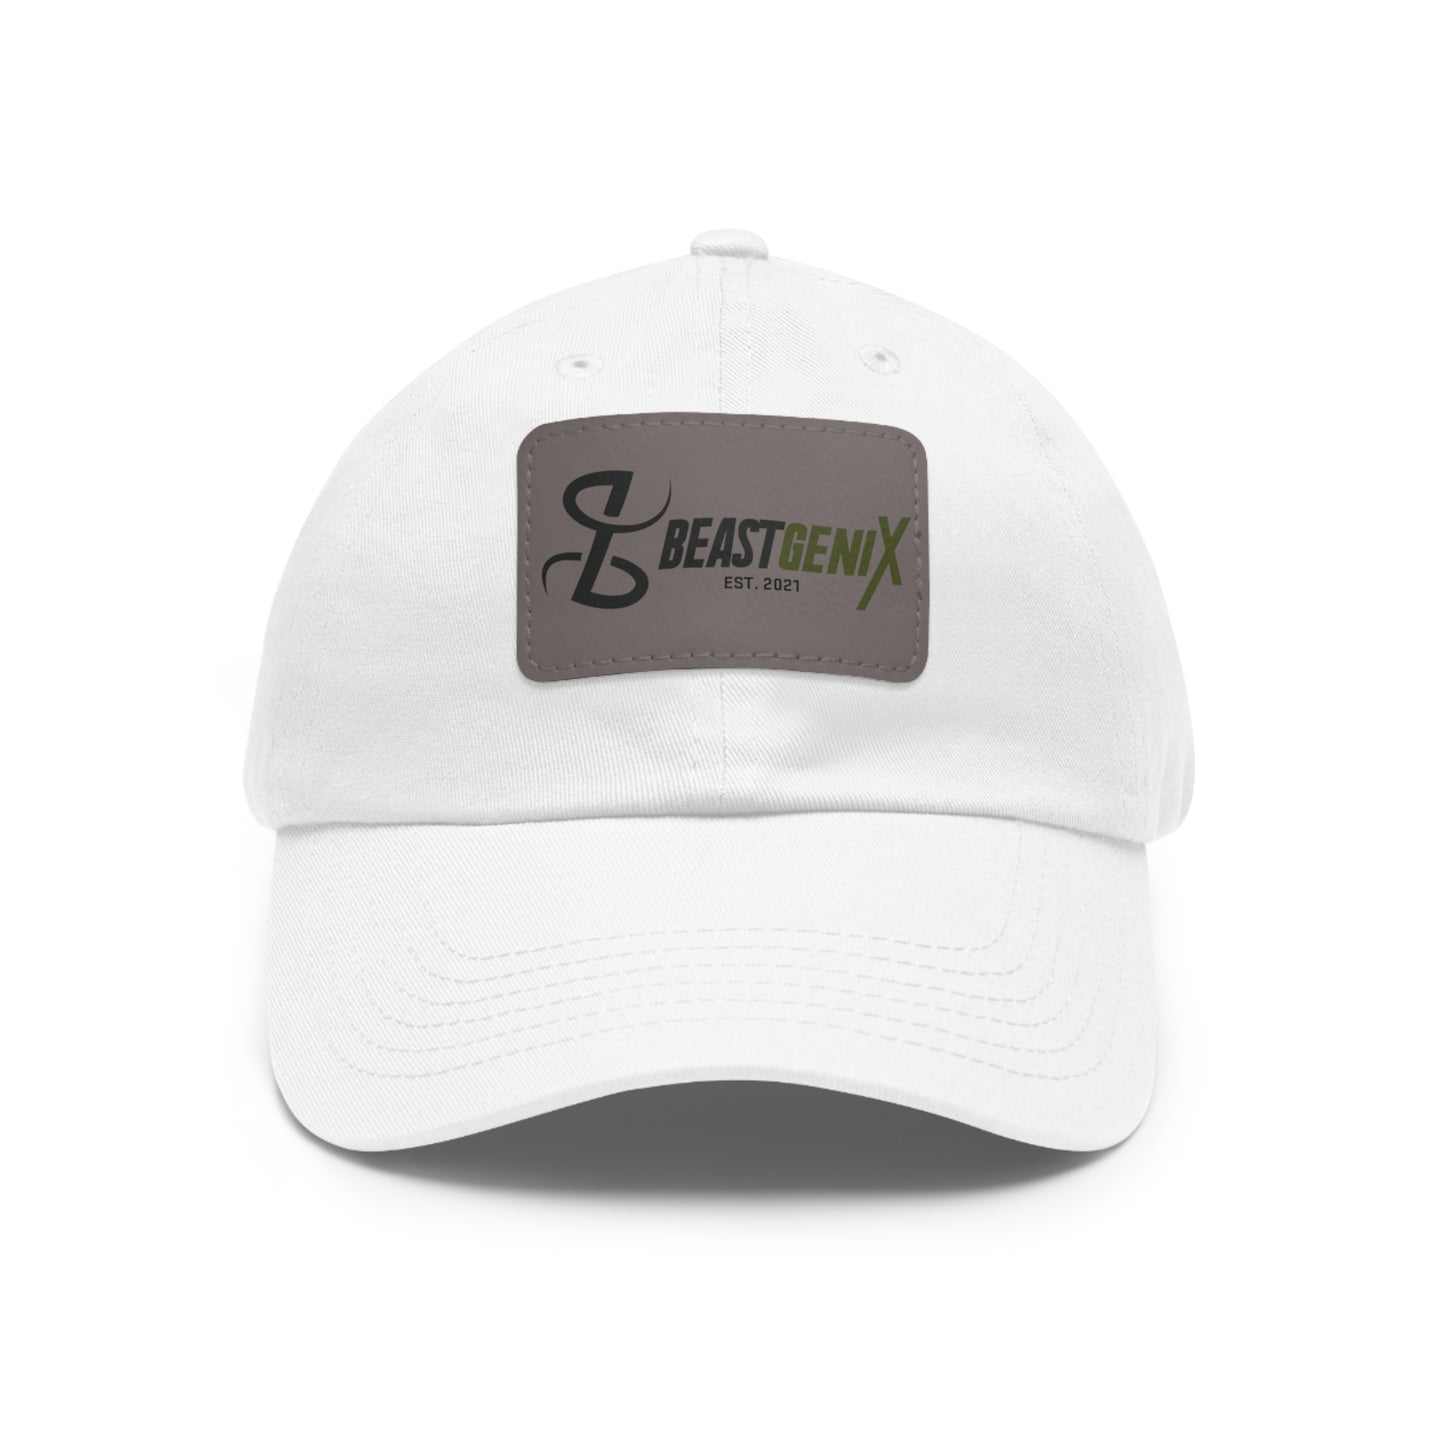 BeastgeniX Army Hat with Leather Patch Est. 2021